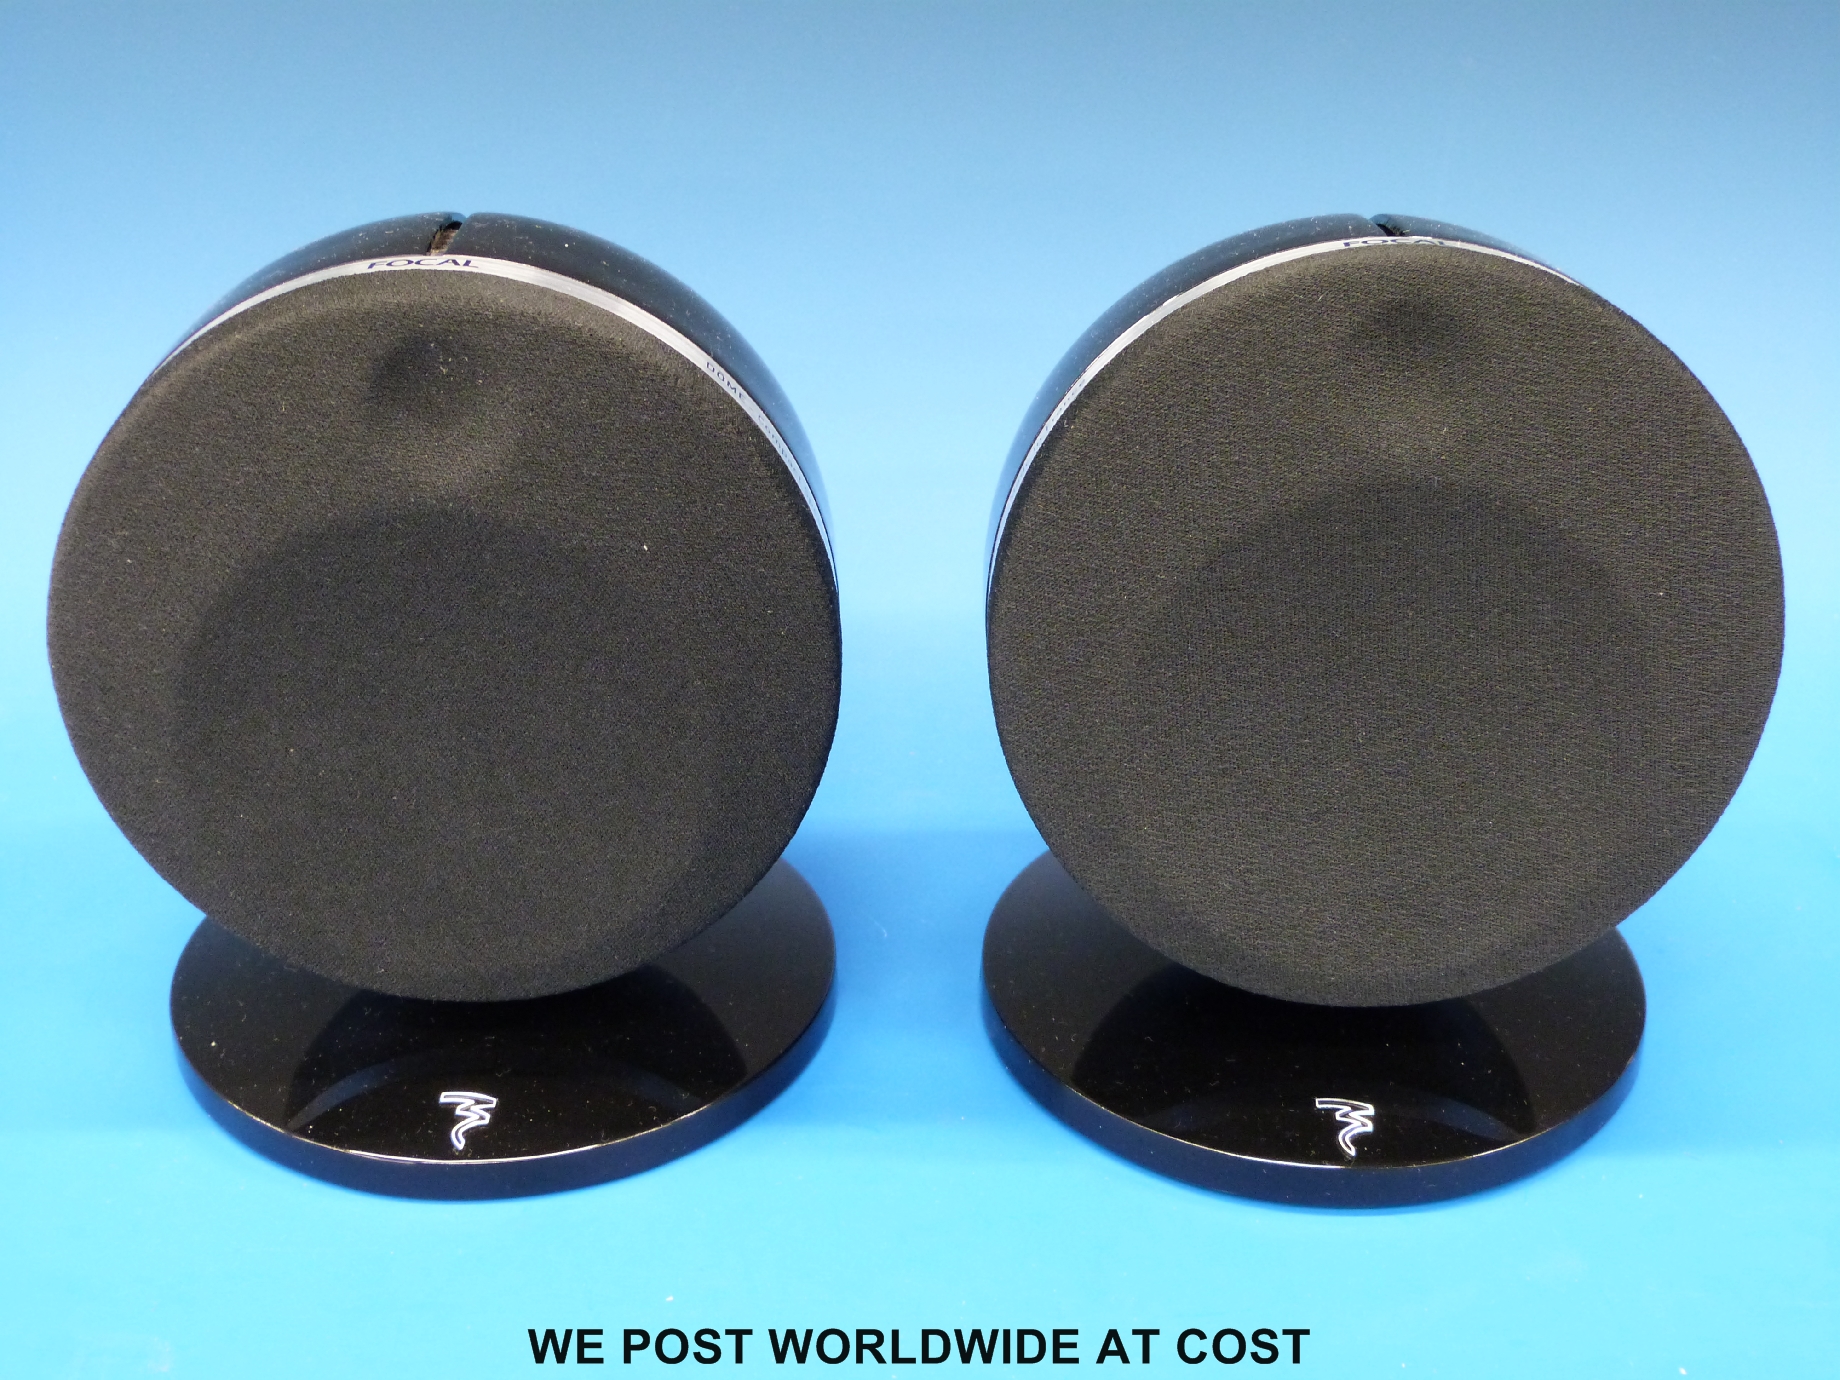 A pair of Focal Dome compact speakers with stands.